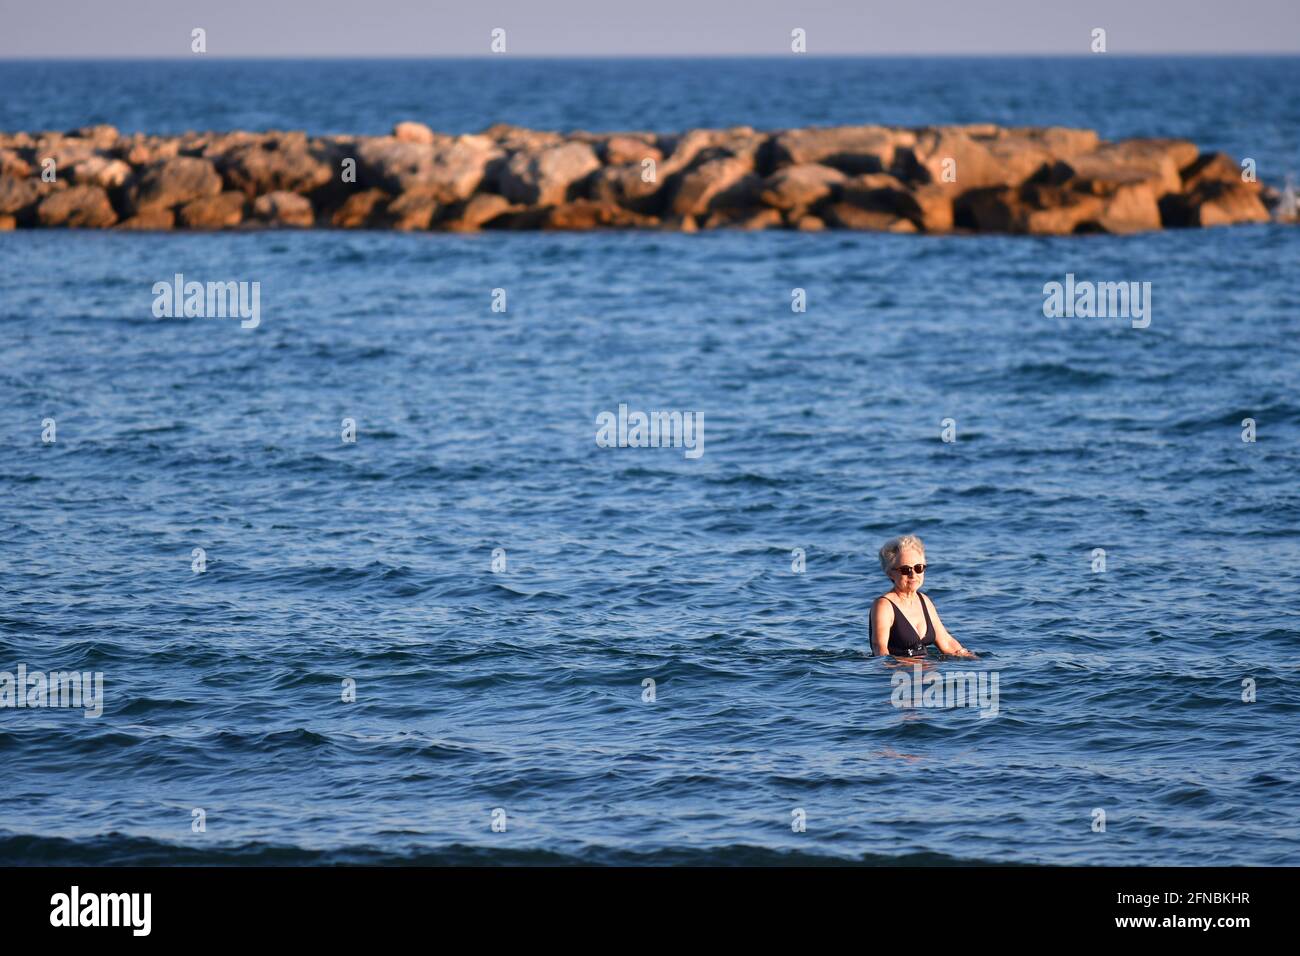 in Palavas les Flots, near Carnon Plage and Montpellier, Occitanie, South  of France Stock Photo - Alamy